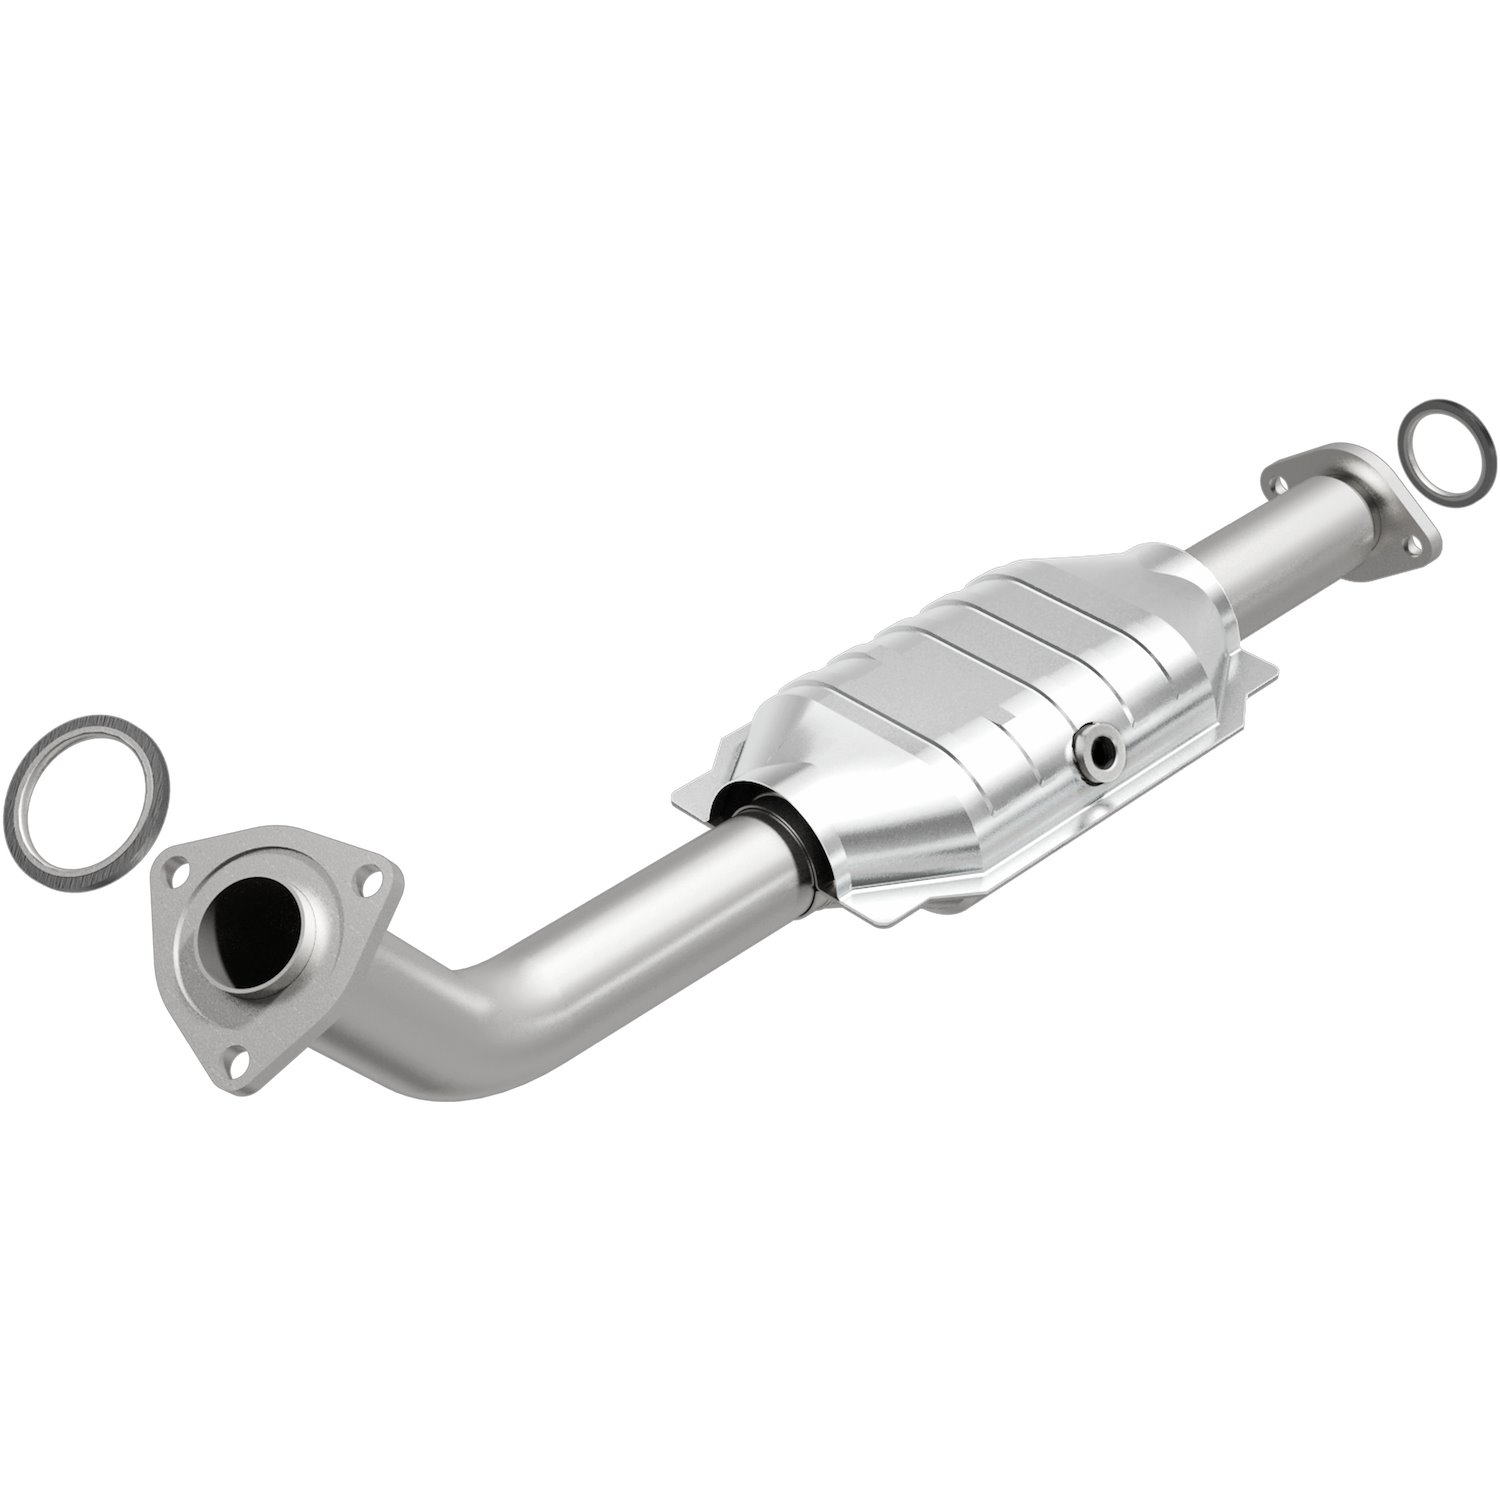 2005-2006 Toyota Tundra HM Grade Federal / EPA Compliant Direct-Fit Catalytic Converter